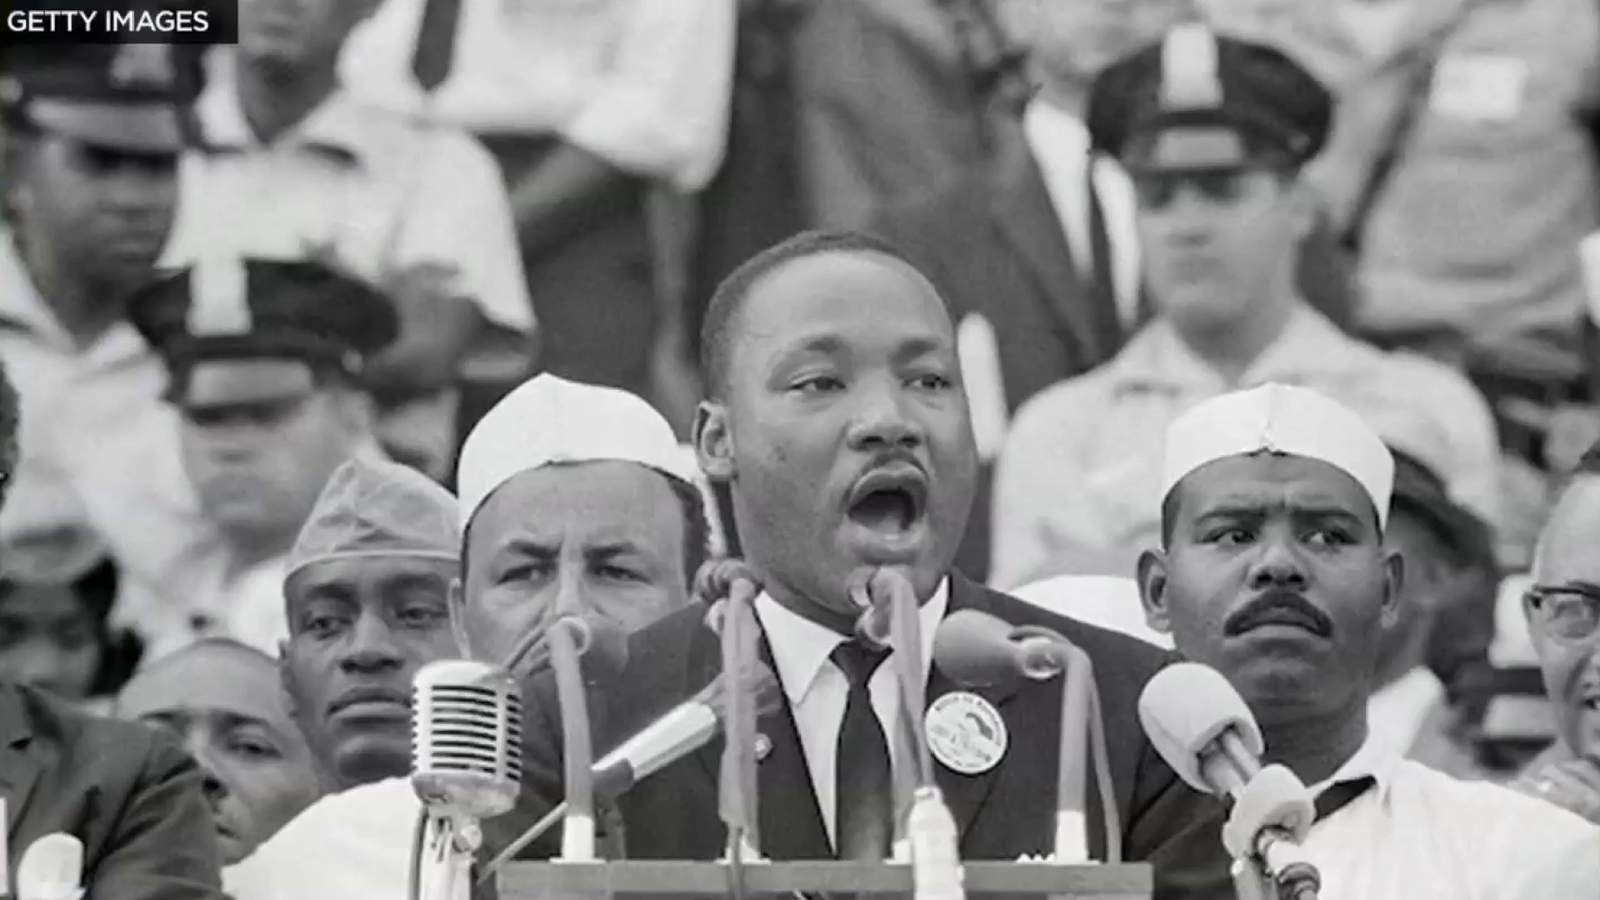 Celebrate the legacy of Dr. Martin Luther King Jr. with these local virtual events